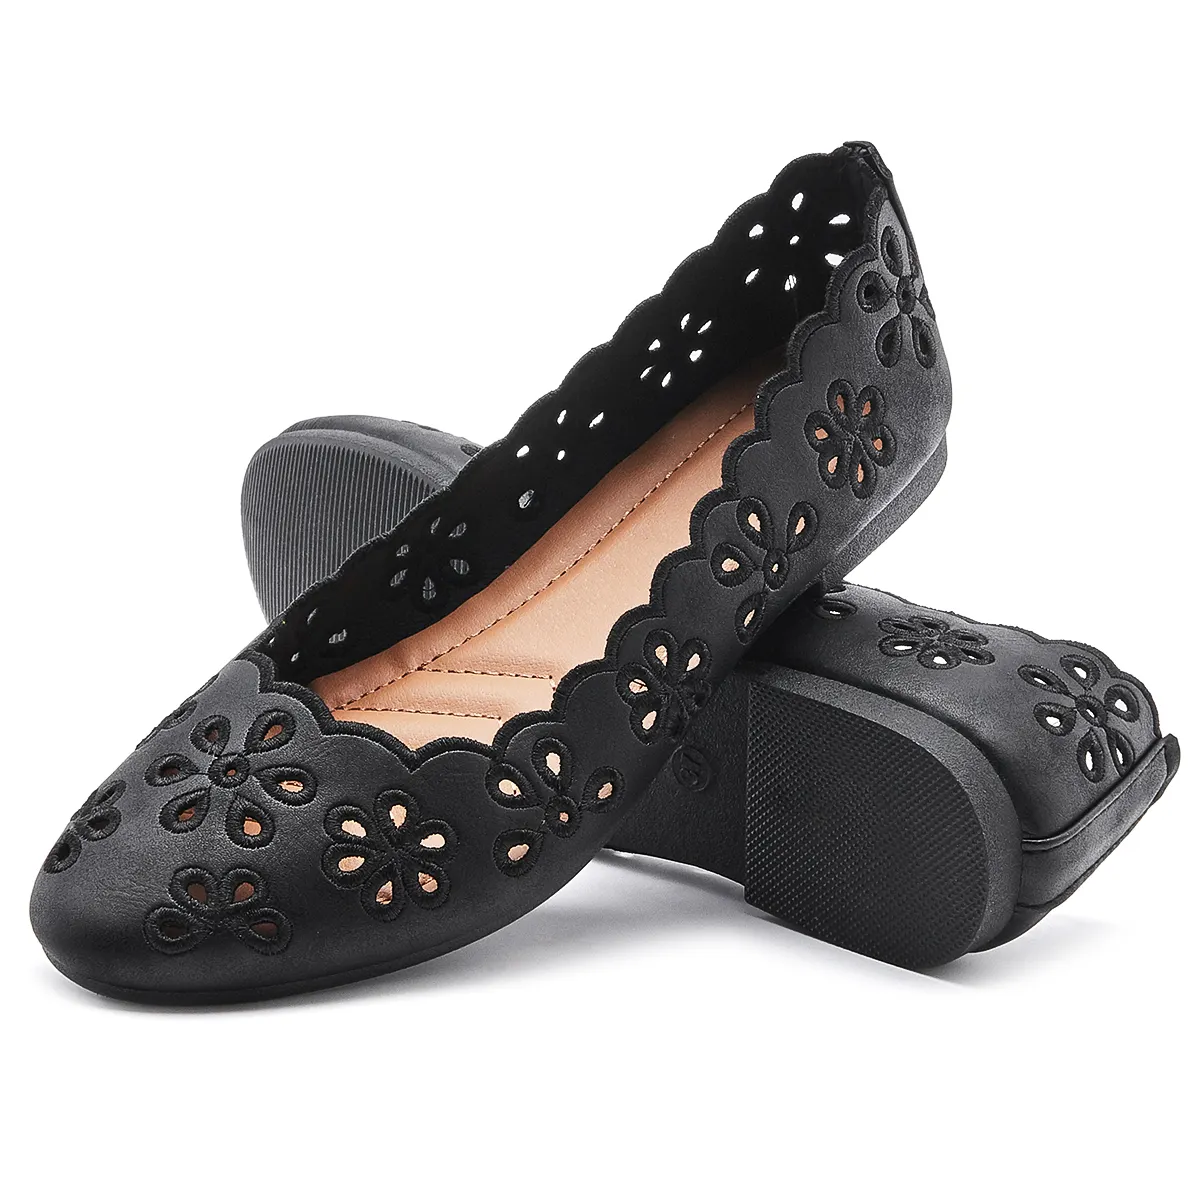 Hot Sale PVC Sole Breathable Shoes Women's Dress Flats Shoes Casual Slip On Flats Loafers Ladies